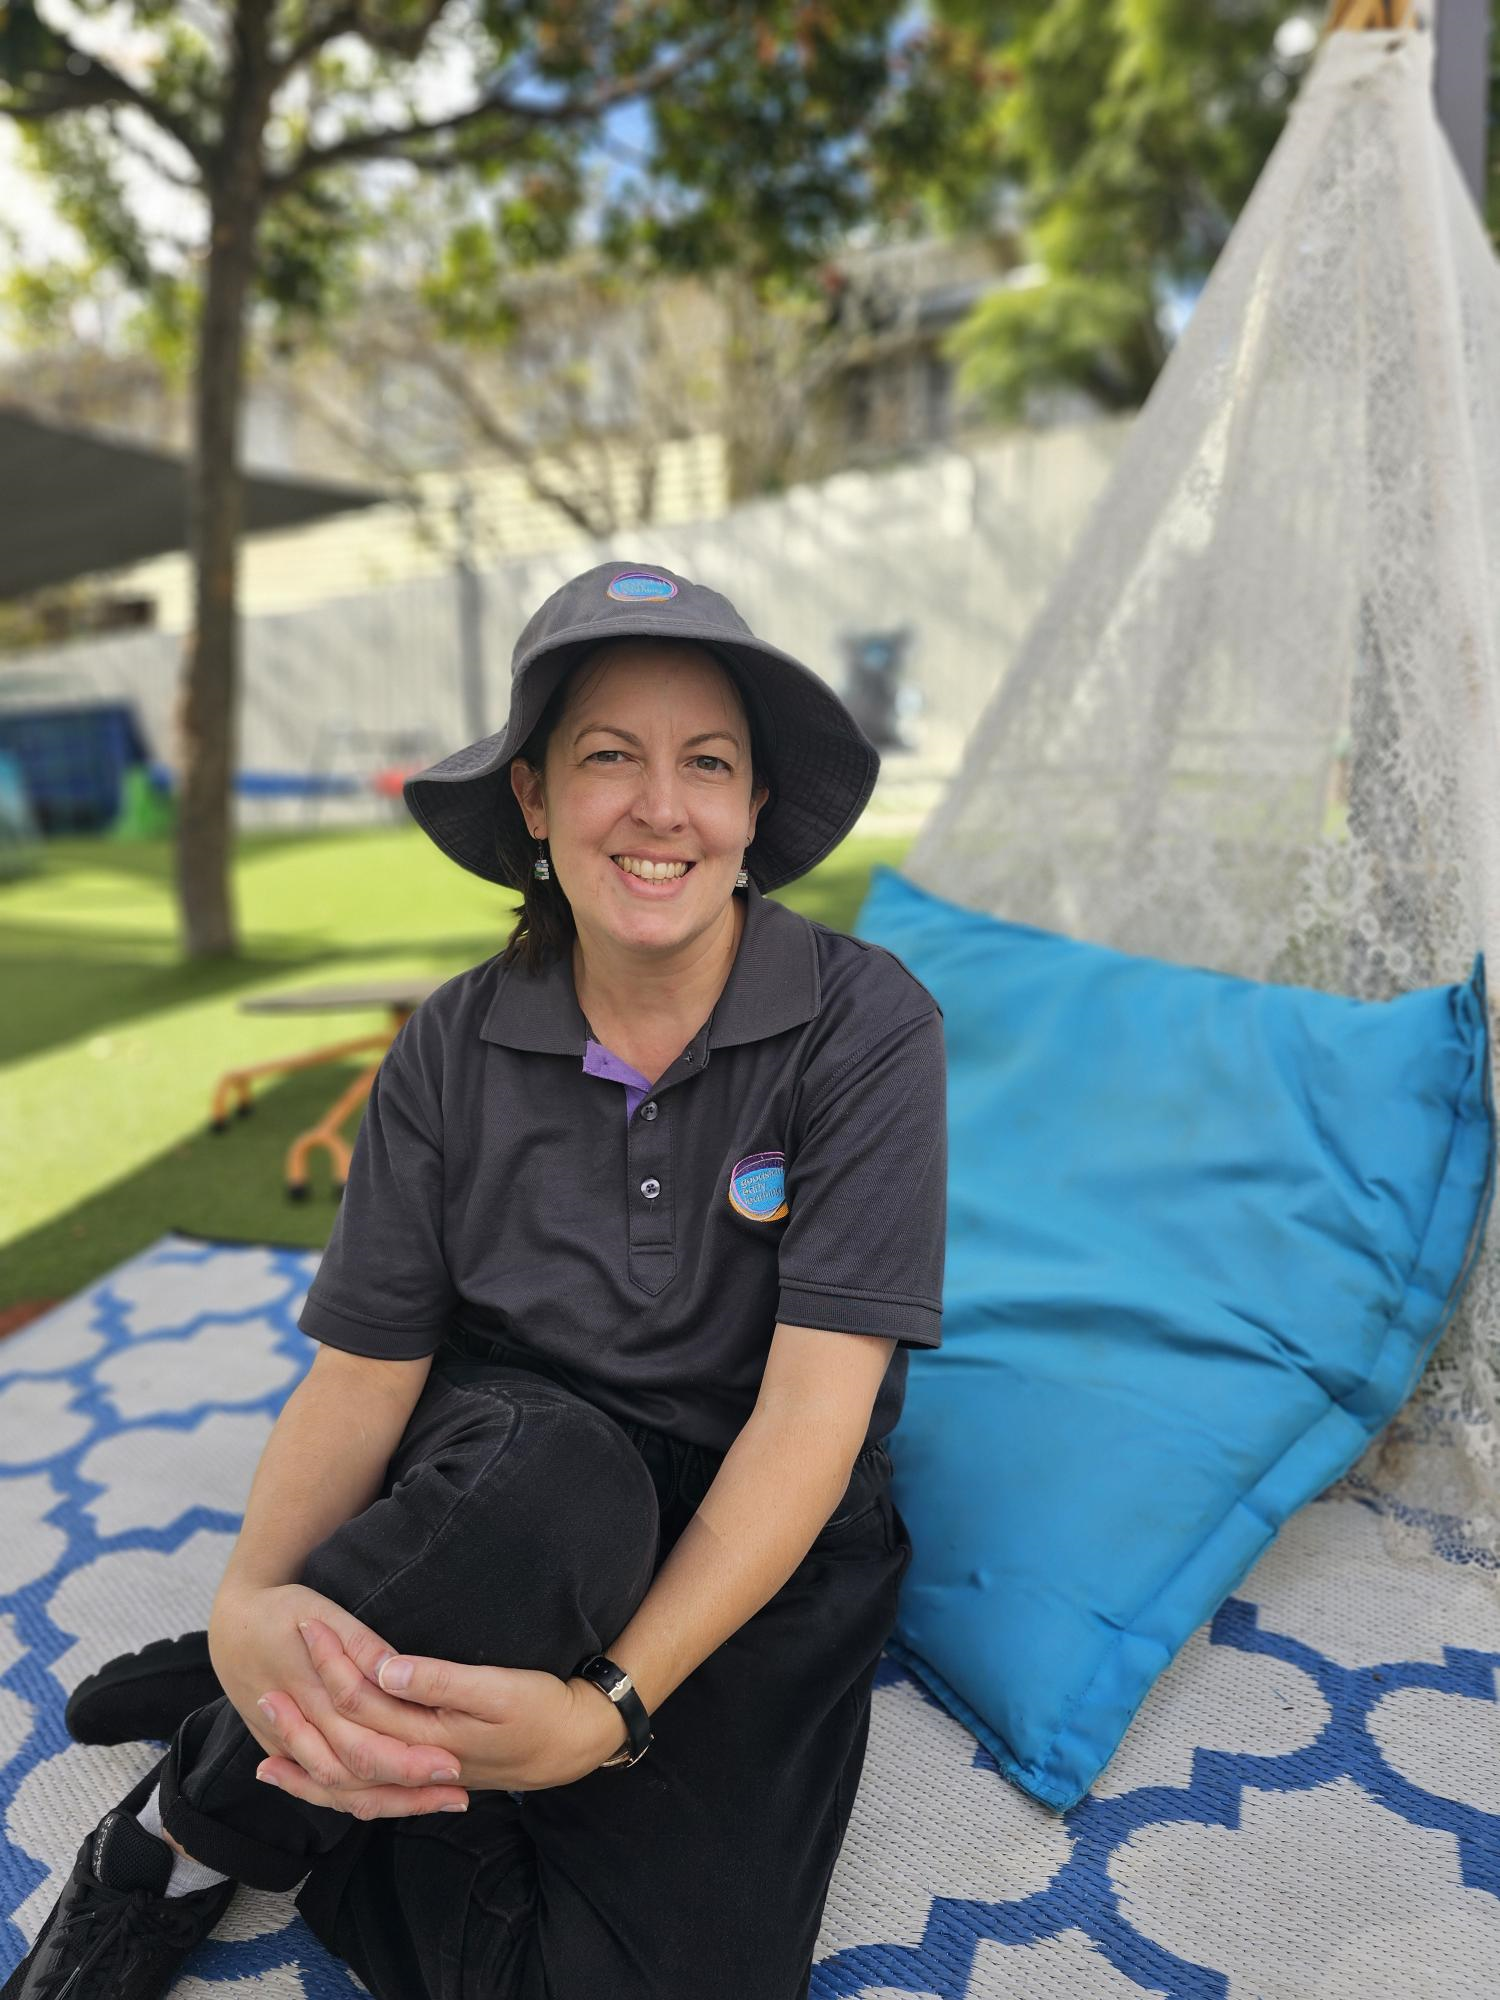 “One of the best things about the career change is that I'm no longer stuck at a desk. I get to move my body, spend time outside in the sunshine, picking up flowers and seedpods and watching bugs with my little learners. What a joy!”